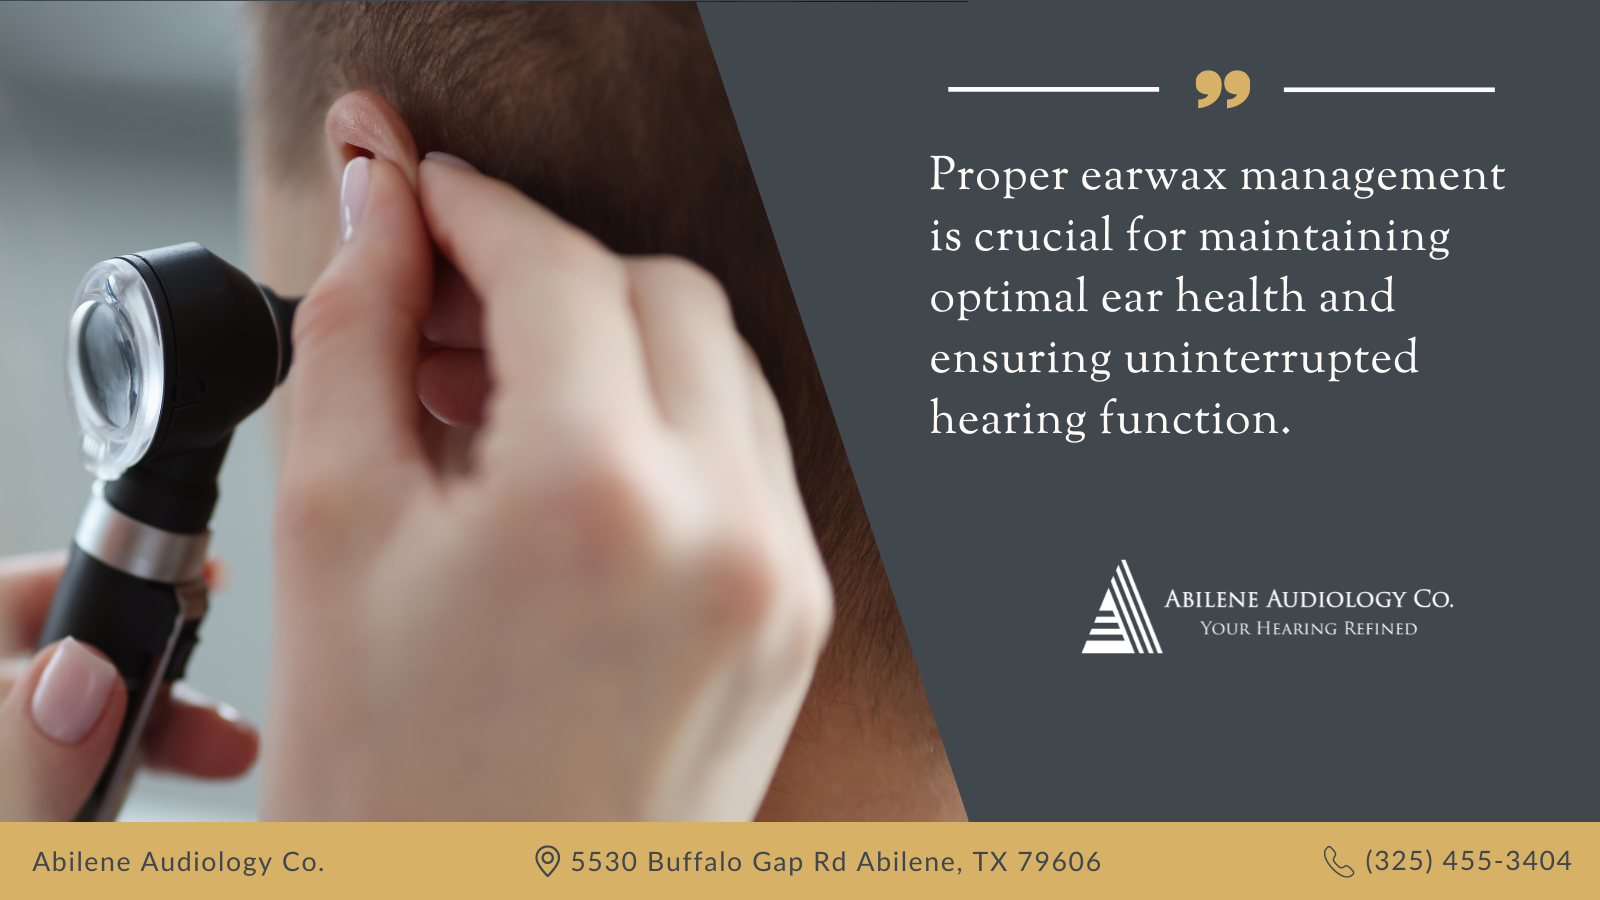 Audiologist Otoscope checking on earwax